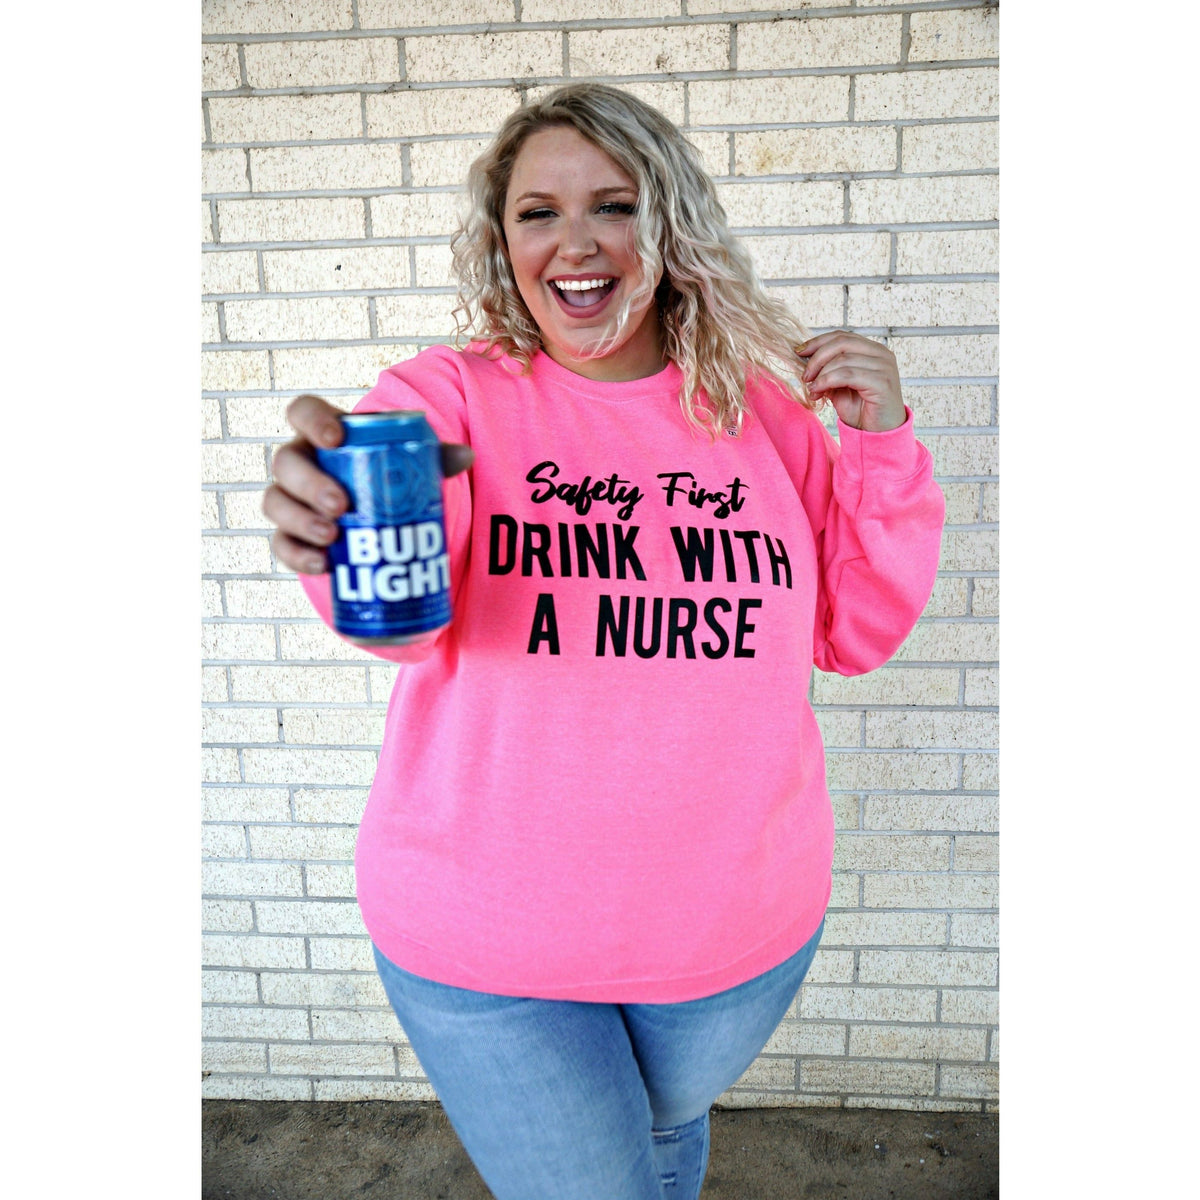 Safety First Drink with a Nurse tee or sweatshirt